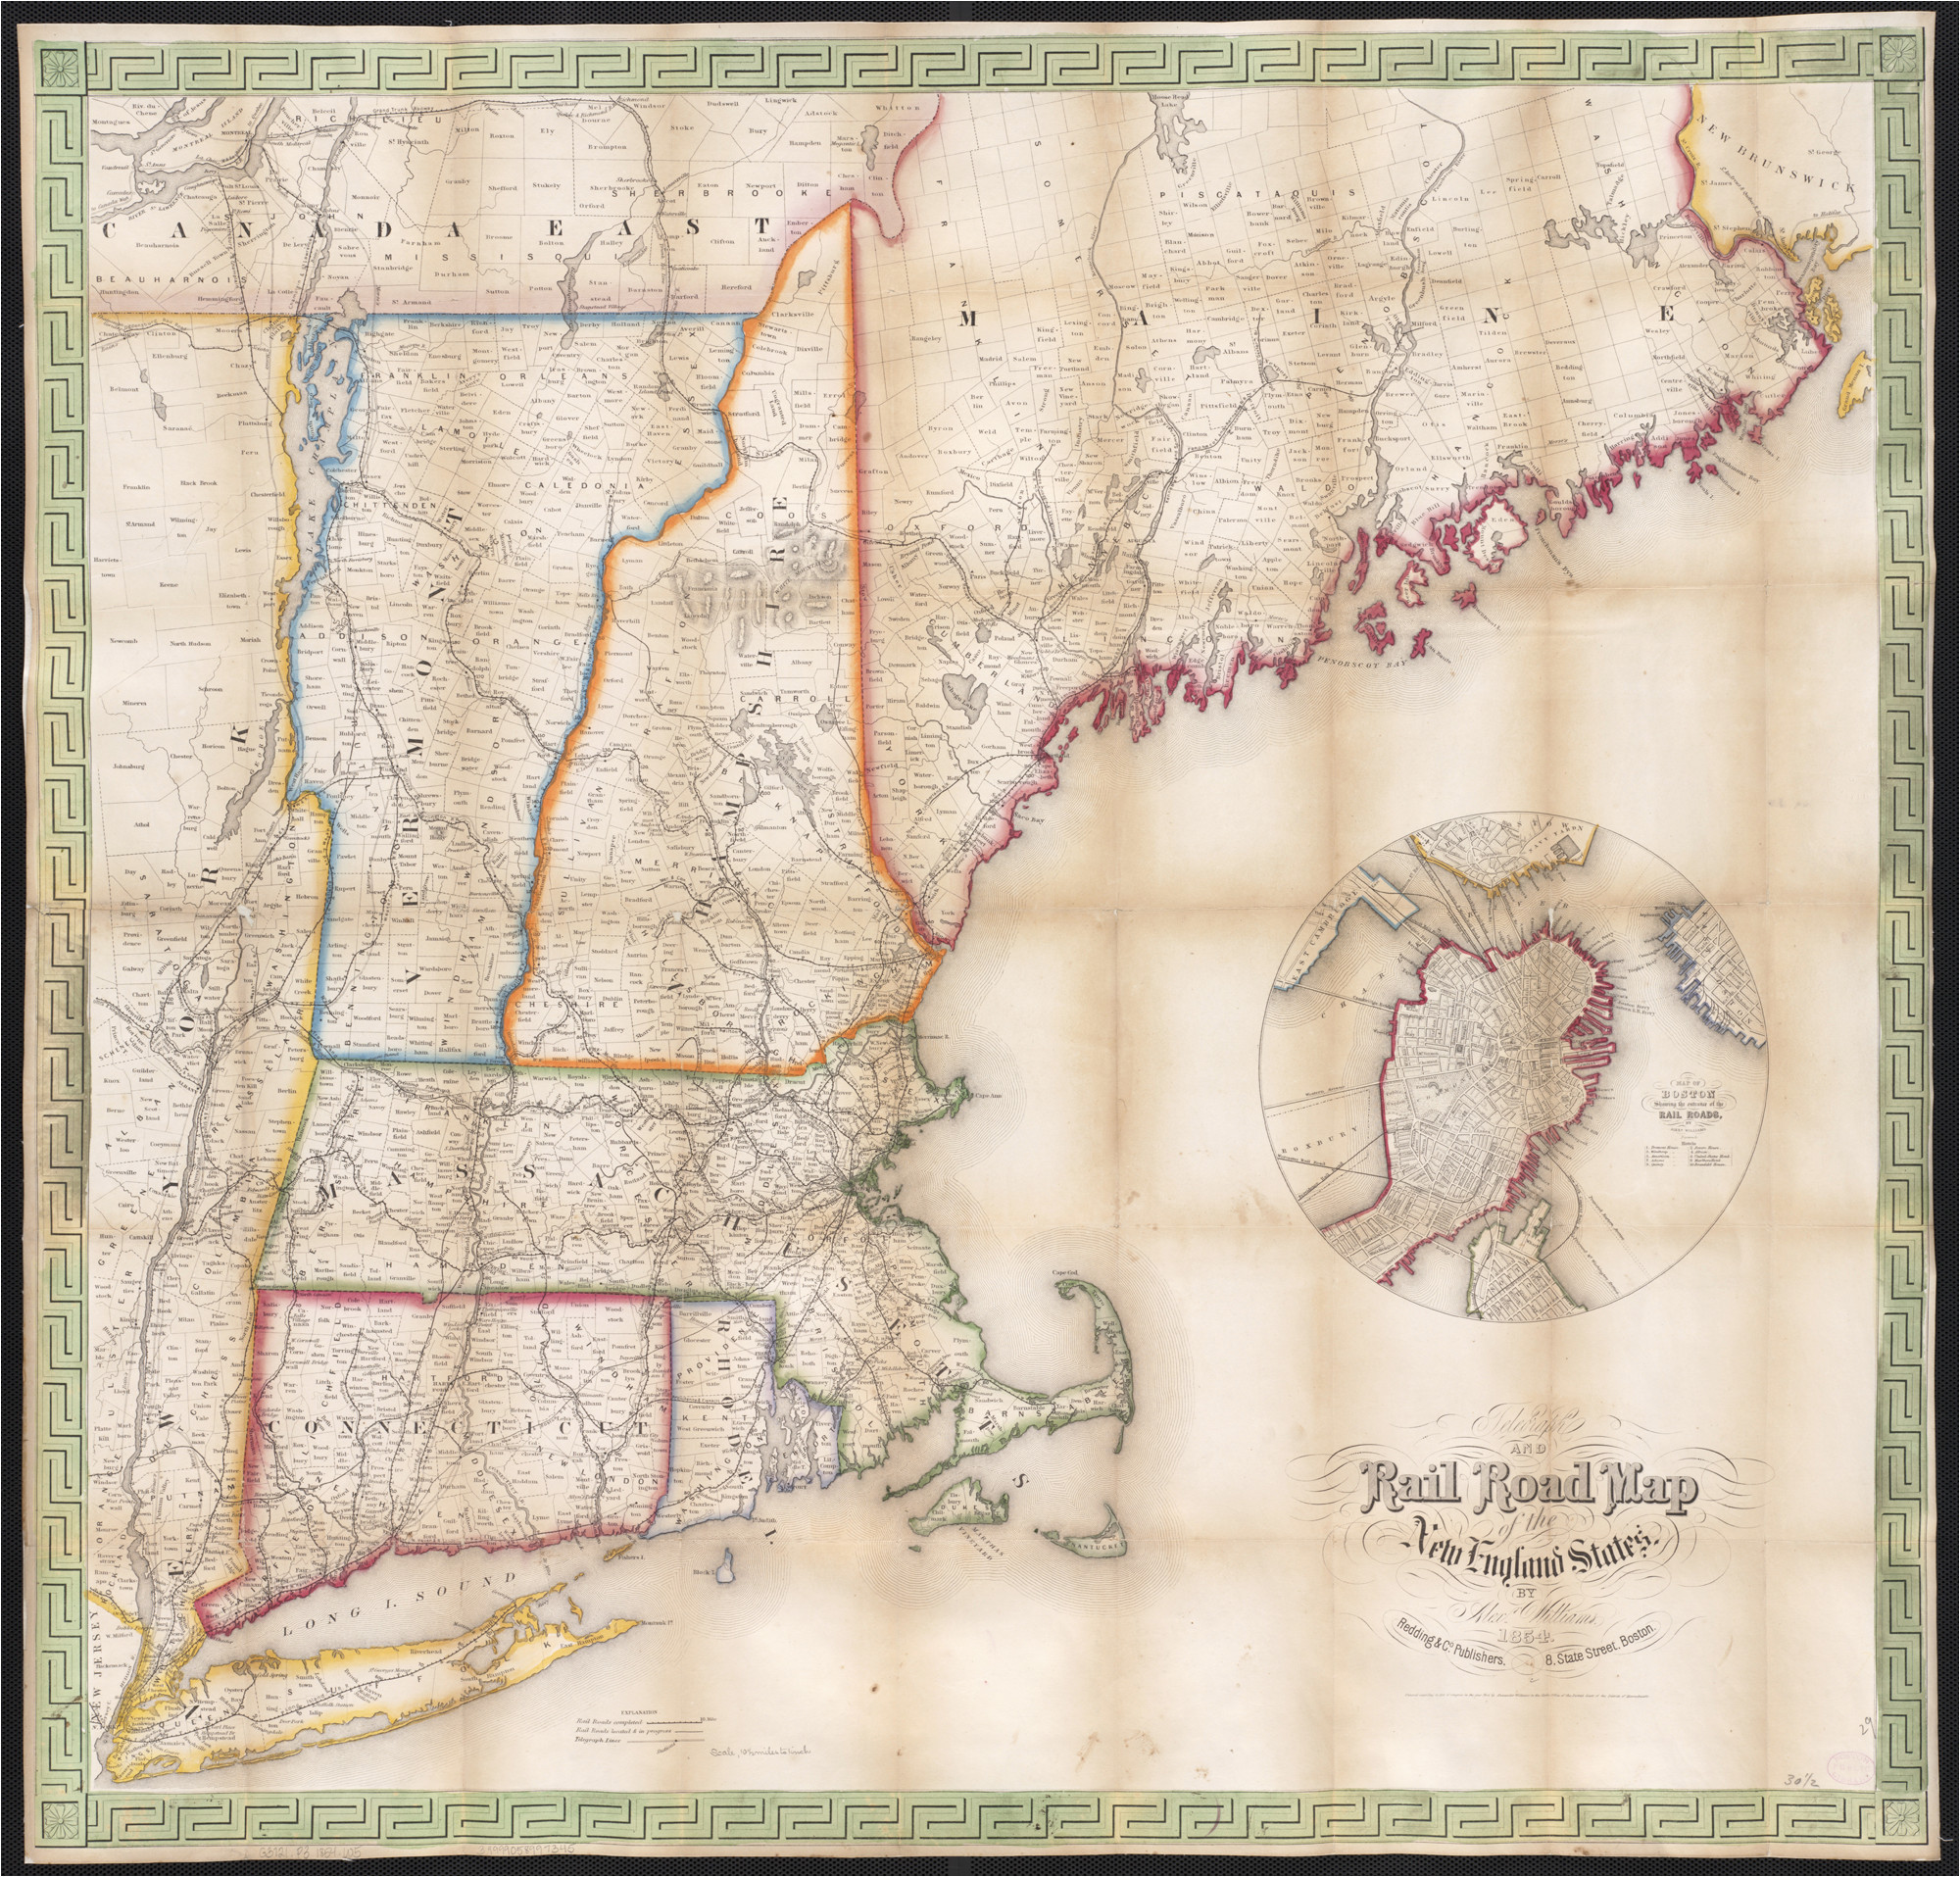 New England Railroad Map File Telegraph and Rail Road Map Of the New England States